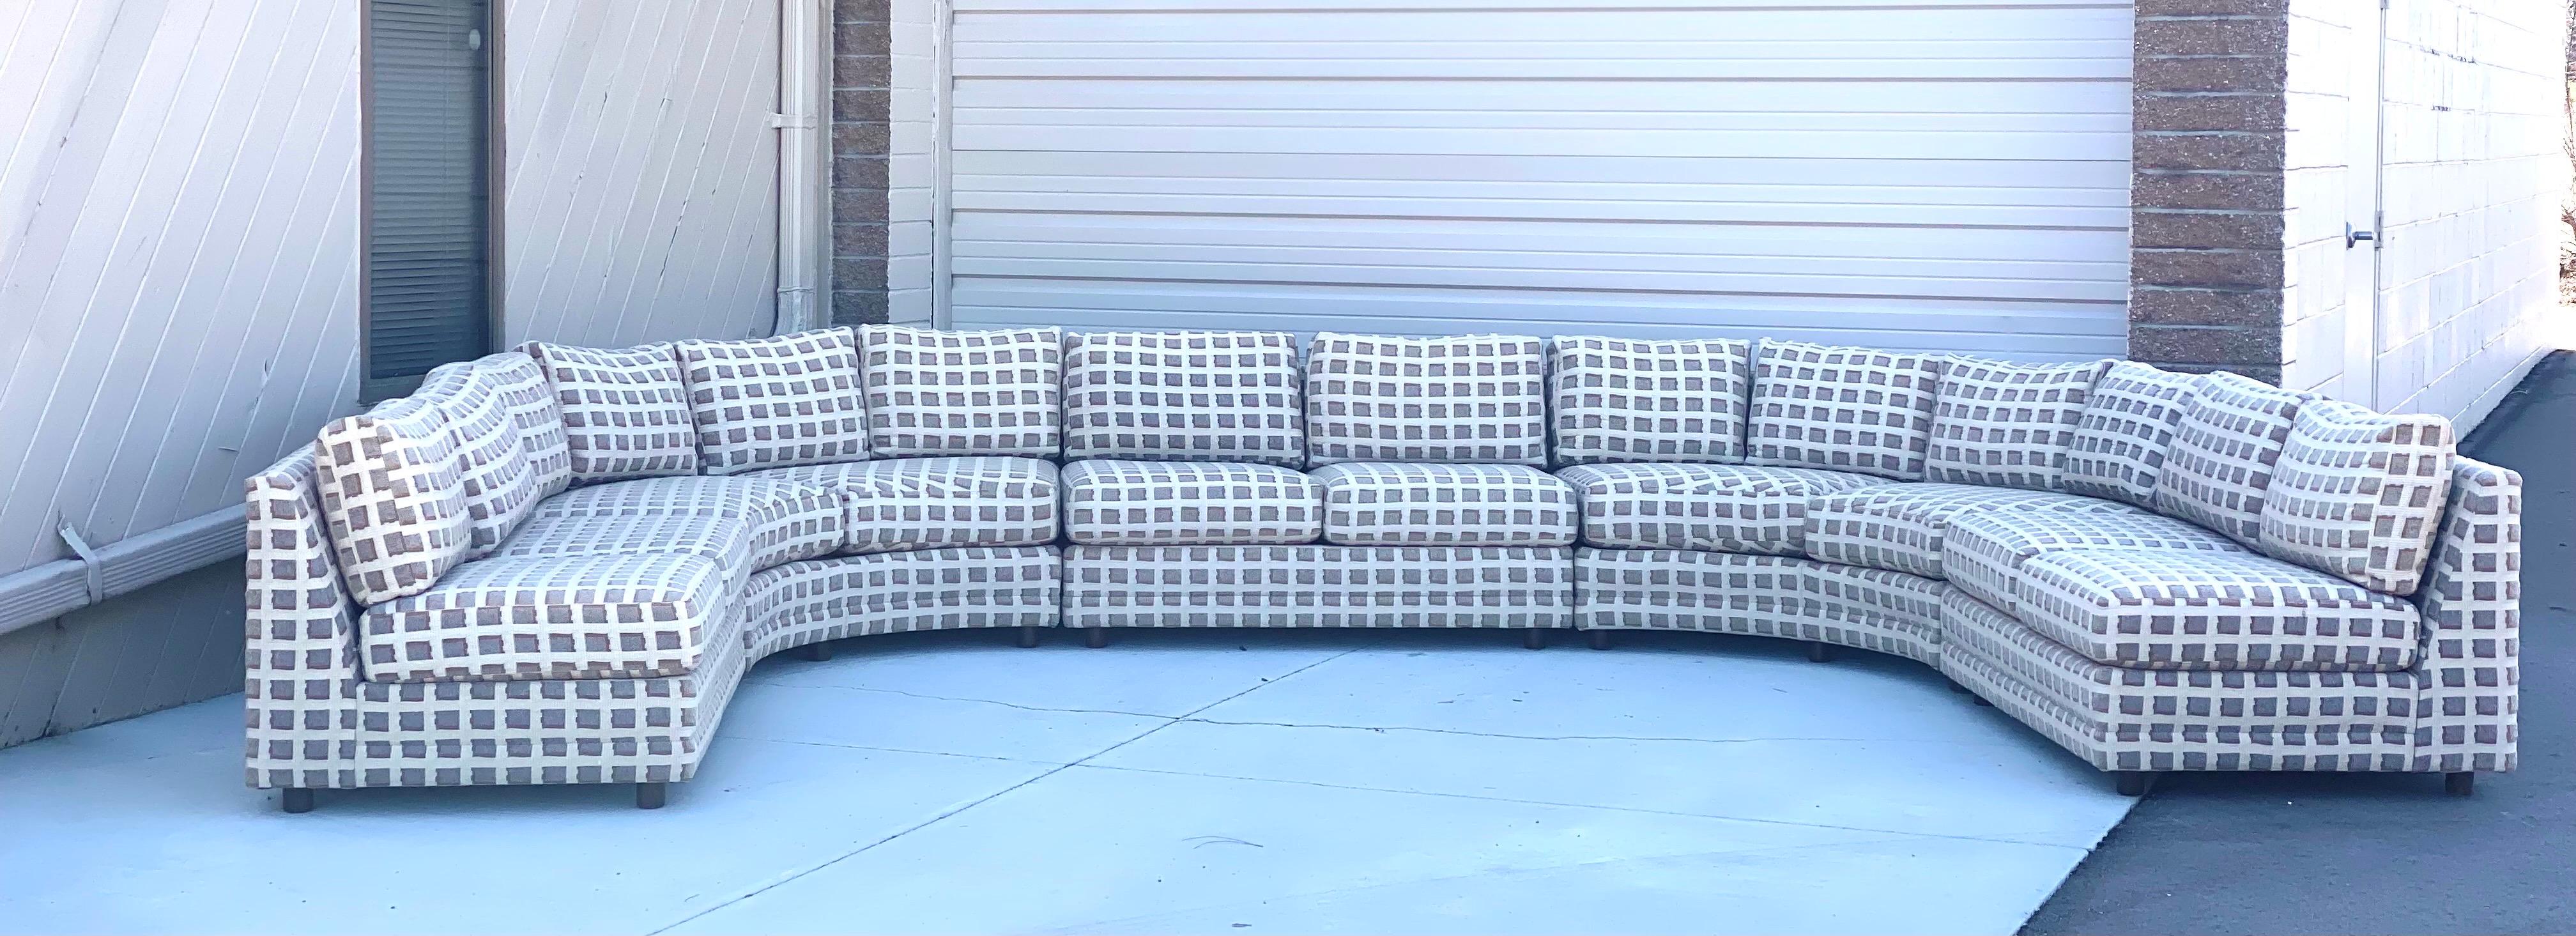 We are very pleased to offer a monumental, custom made, five-piece semicircular sectional, circa the 1980s. Showcasing clean Mid-Century lines and unequaled comfort, this large sofa is perfect for lounging with the family, entertaining, or just